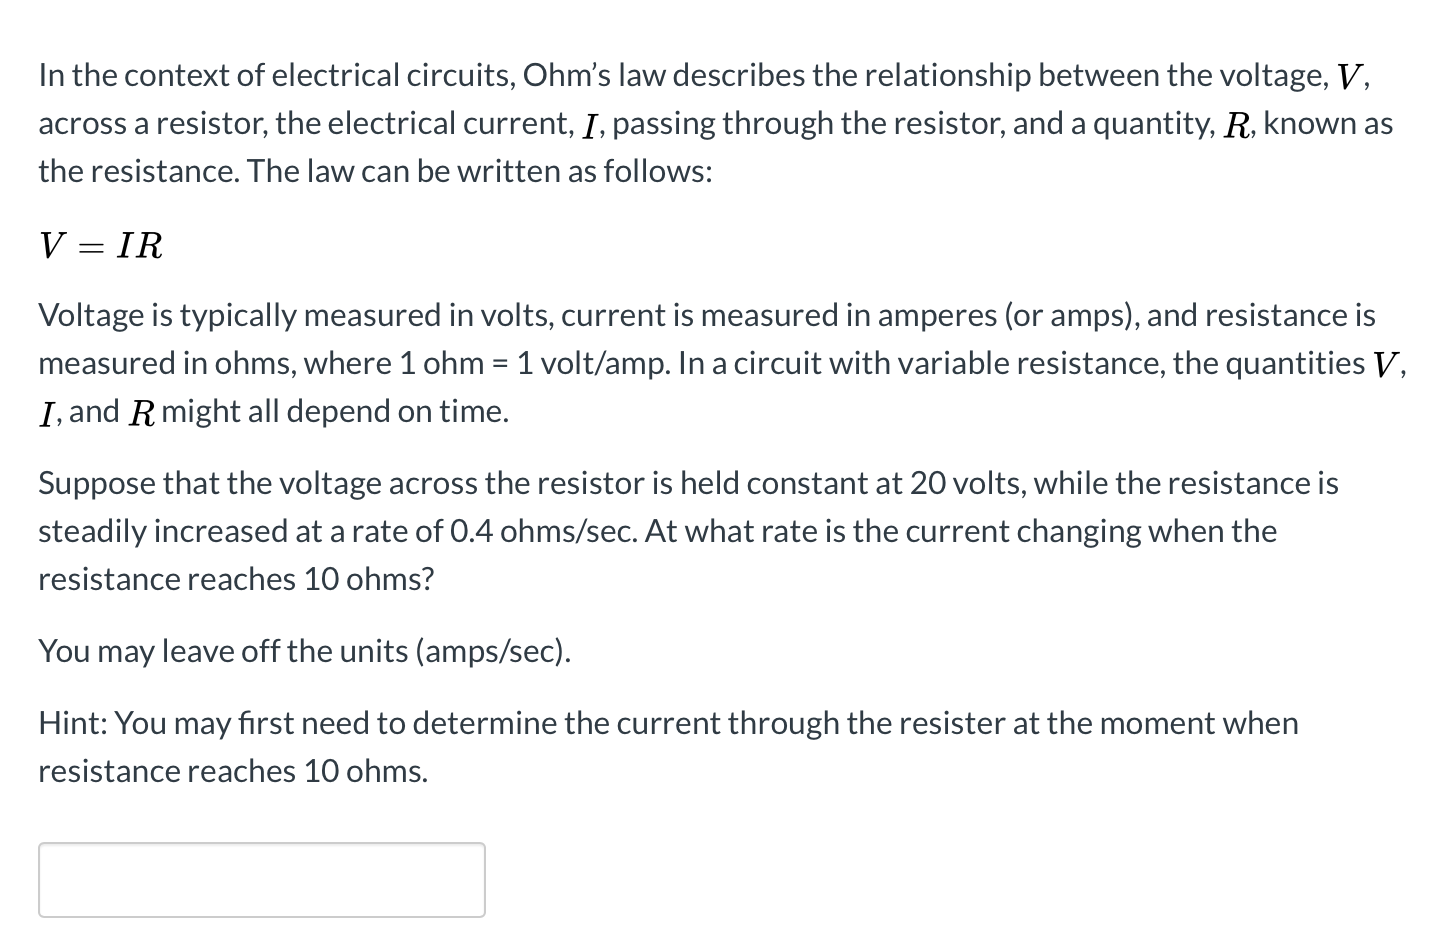 In the context of electrical circuits, Ohm's law describes the relationship between the voltage, V,
across a resistor, the electrical current, I, passing through the resistor, and a quantity, R, known as
the resistance. The law can be written as follows:
V = IR
Voltage is typically measured in volts, current is measured in amperes (or amps), and resistance is
measured in ohms, where 1 ohm = 1 volt/amp. In a circuit with variable resistance, the quantities V,
I, and R might all depend on time.
Suppose that the voltage across the resistor is held constant at 20 volts, while the resistance is
steadily increased at a rate of 0.4 ohms/sec. At what rate is the current changing when the
resistance reaches 10 ohms?
You may leave off the units (amps/sec).
Hint: You may fırst need to determine the current through the resister at the moment when
resistance reaches 10 ohms.
